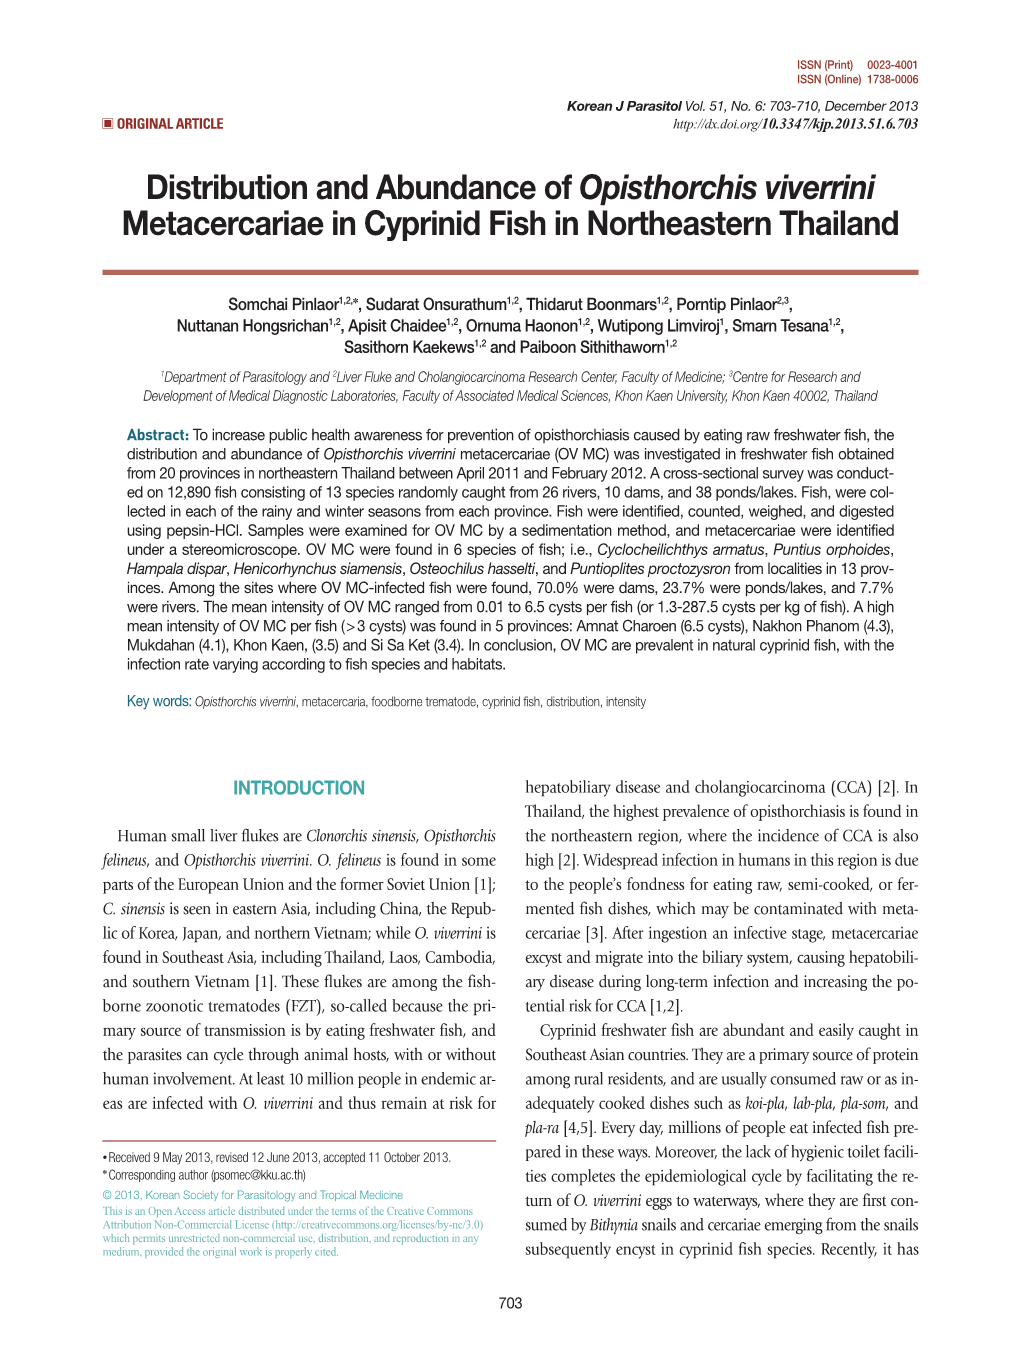 Distribution and Abundance of Opisthorchis Viverrini Metacercariae in Cyprinid Fish in Northeastern Thailand